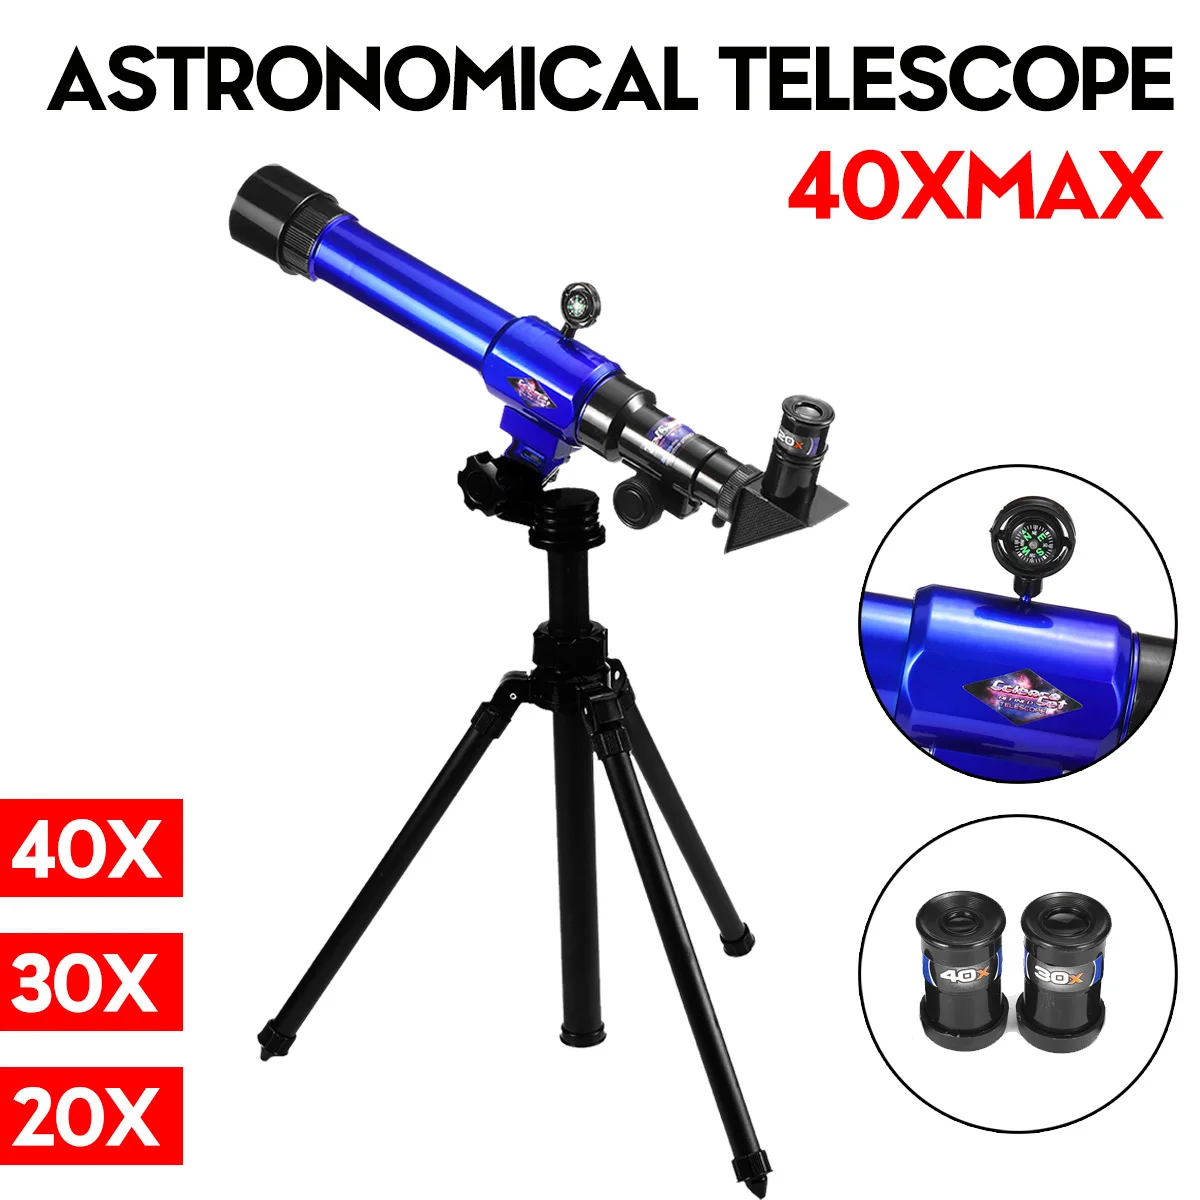 

20X30X40X Zoom Children's High Definition Astronomical Telescope Monocular Star View Multi-eyepiece Portable for Hunting Camping